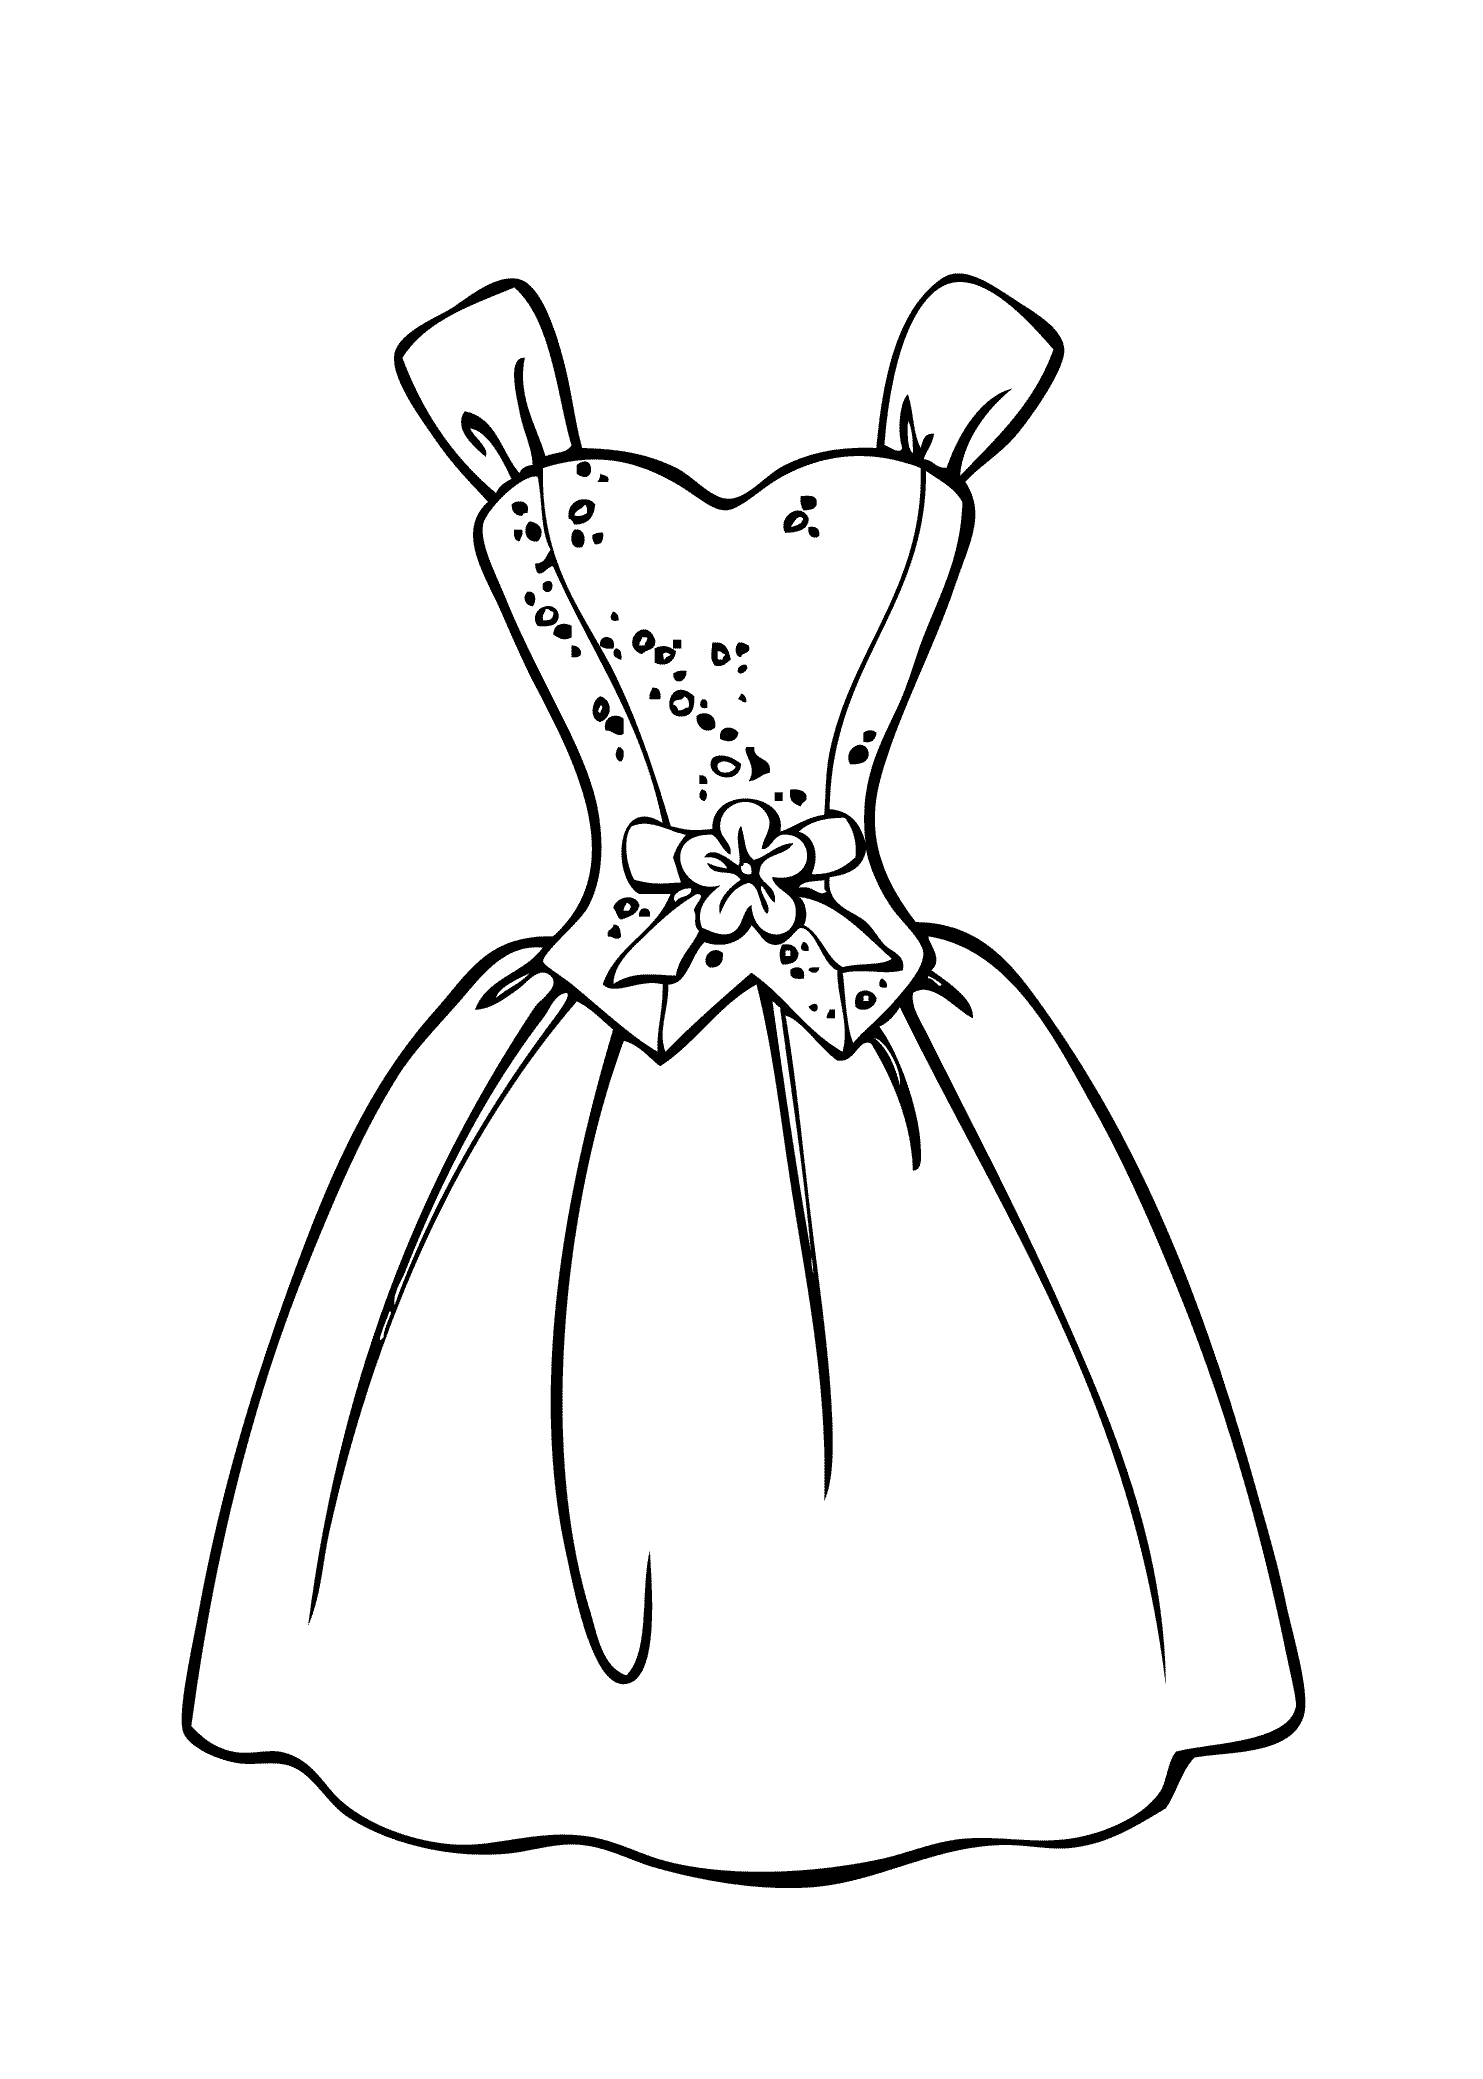 Blank Dress Coloring Page | Coloring Pages For All Ages